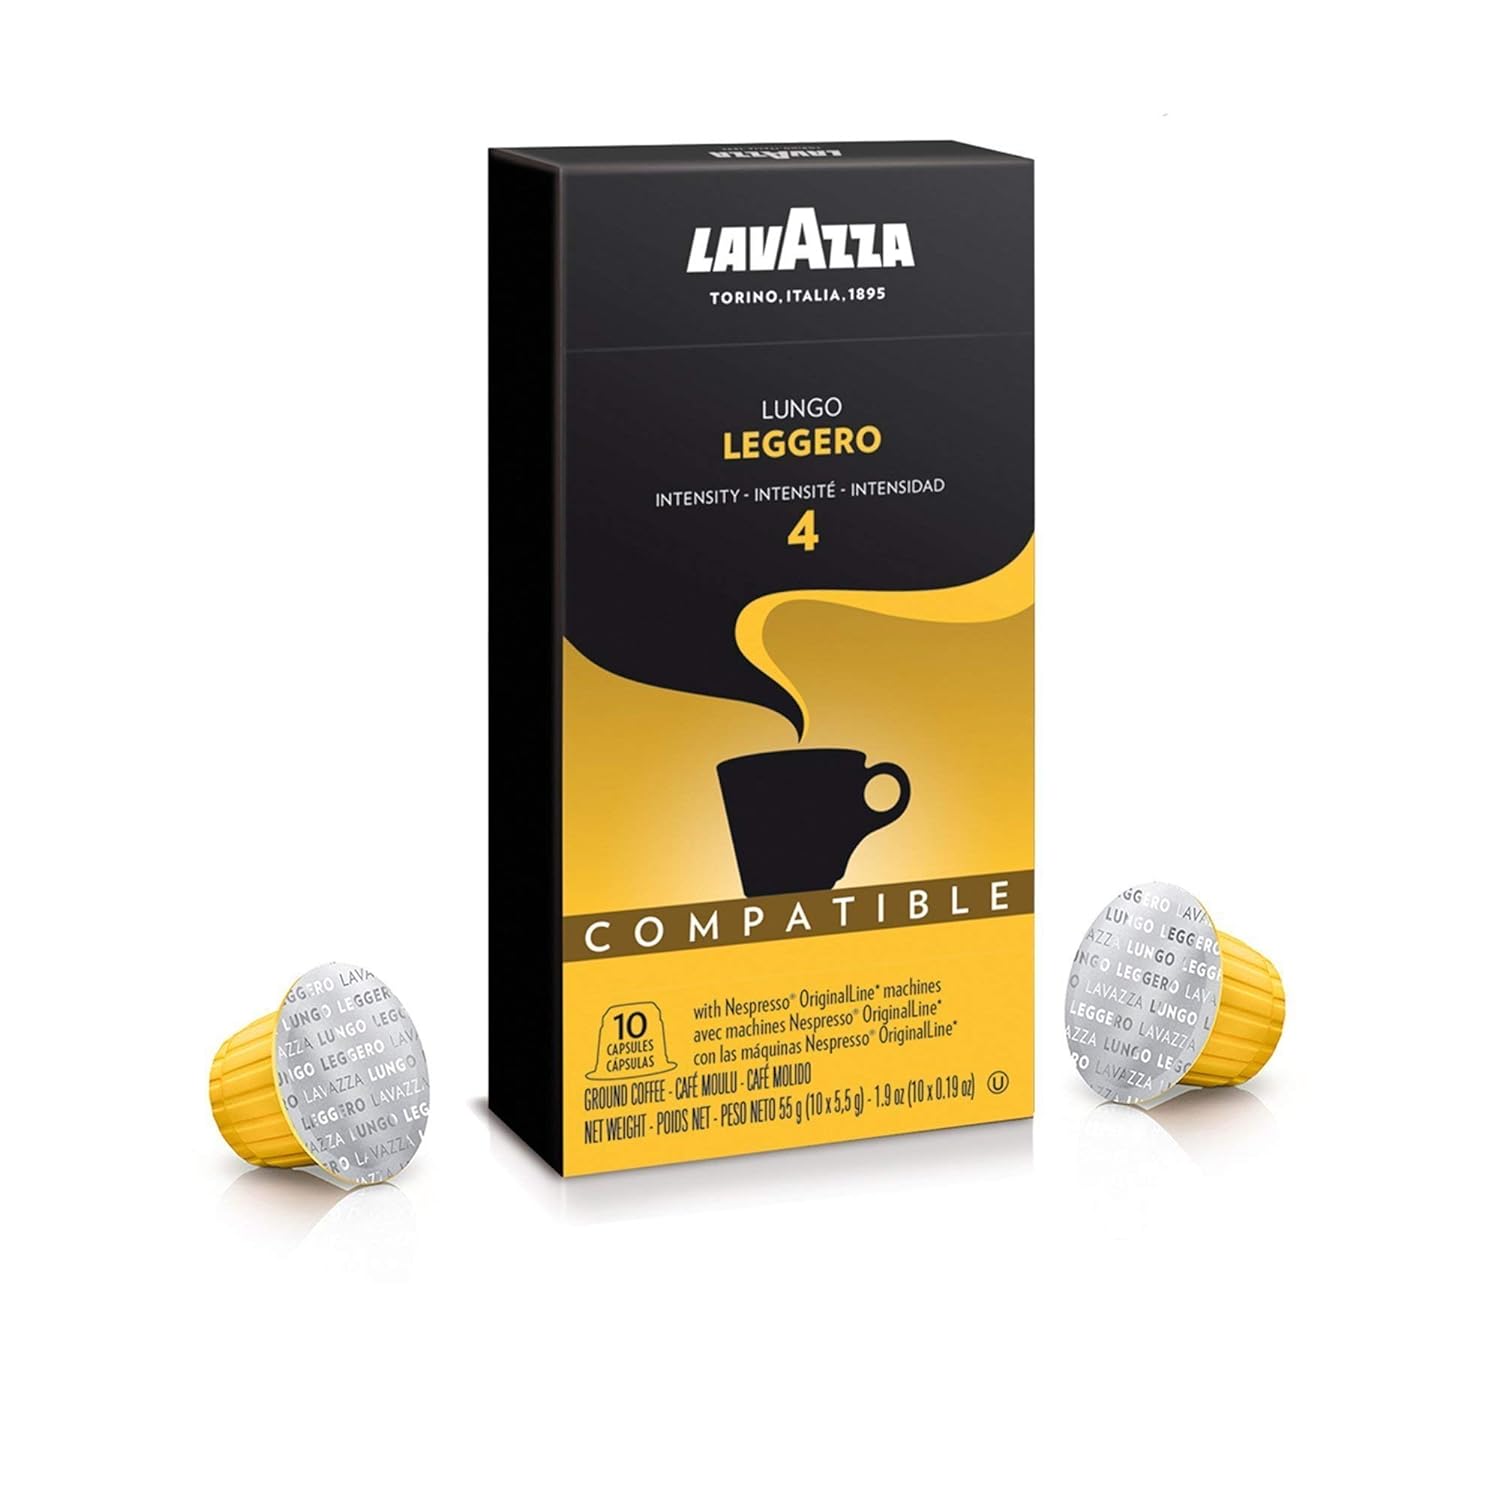 Lavazza Leggero Lungo Medium Roast Capsules Compatible with Nespresso Original Machines (Pack of 60) ,Value Pack, Blended and roasted in Italy, Full bodied, velvety crema and fruity and floral notes : Everything Else